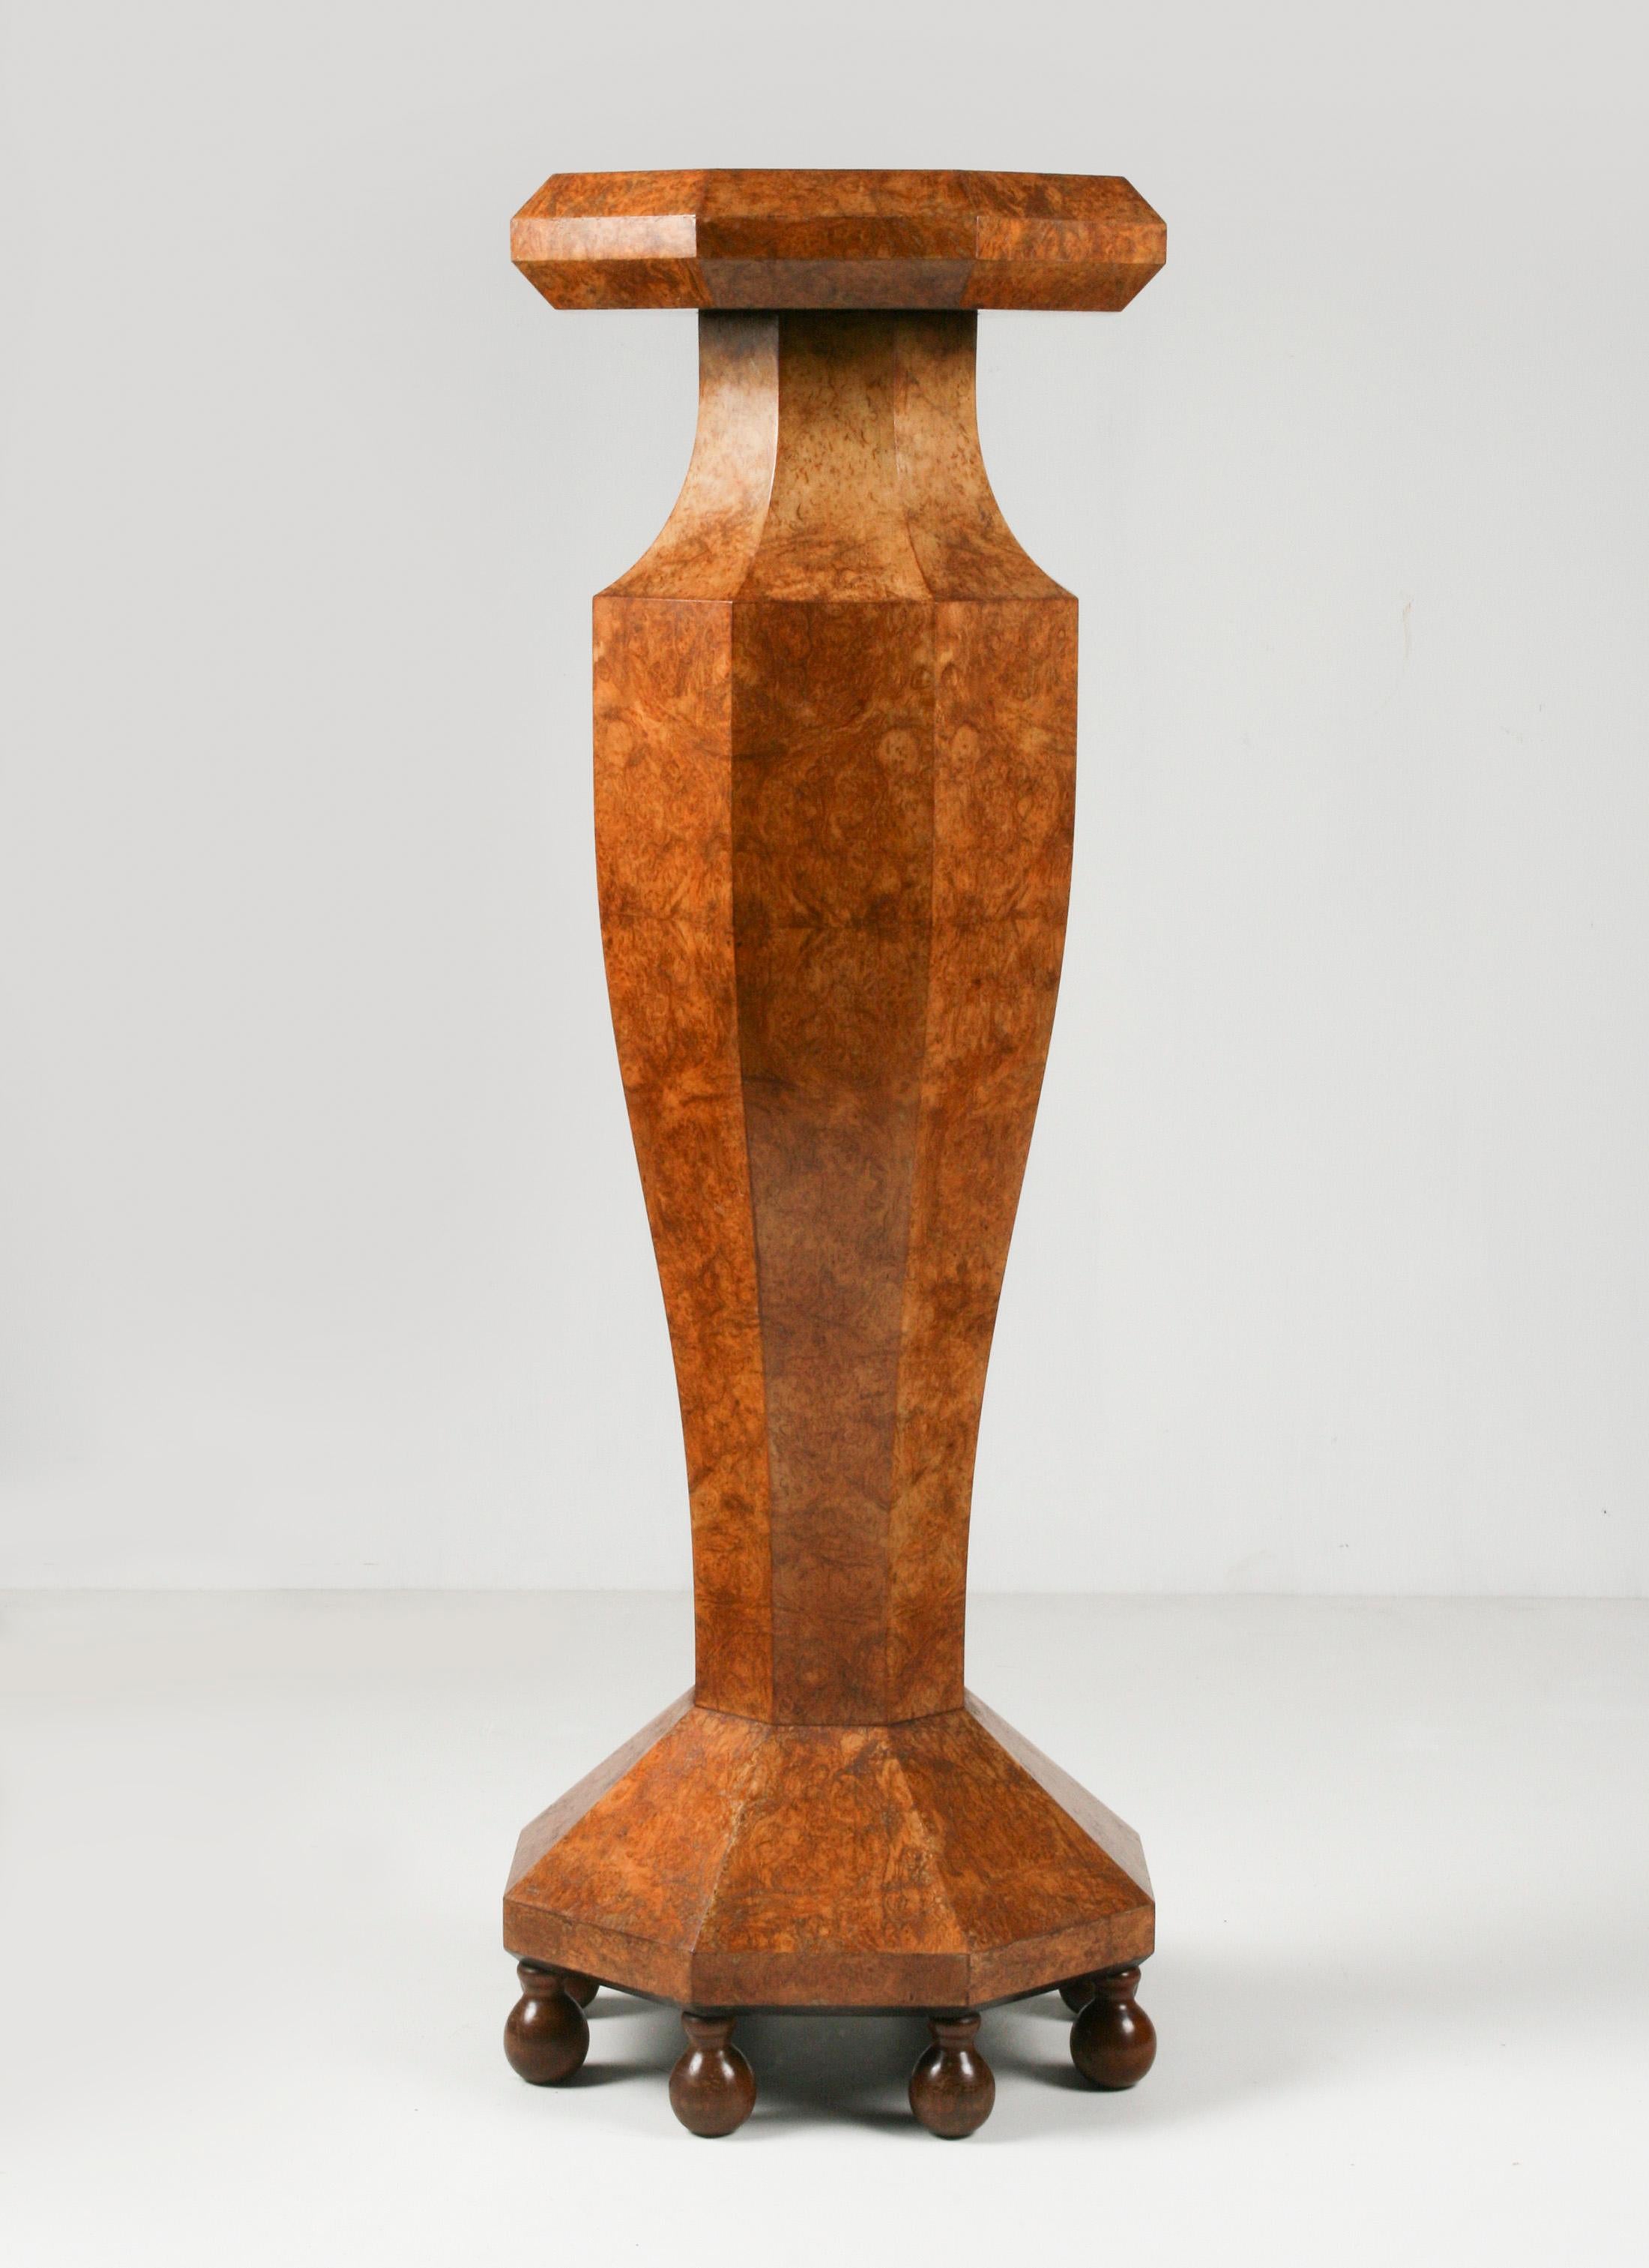 Elegant French Art Deco octagonal pedestal with ball-shaped feet on each corner. The column is book-match veneer burl walnut. Perfect for displaying decorative items such as a bust or a vase. France, circa 1920-1930.